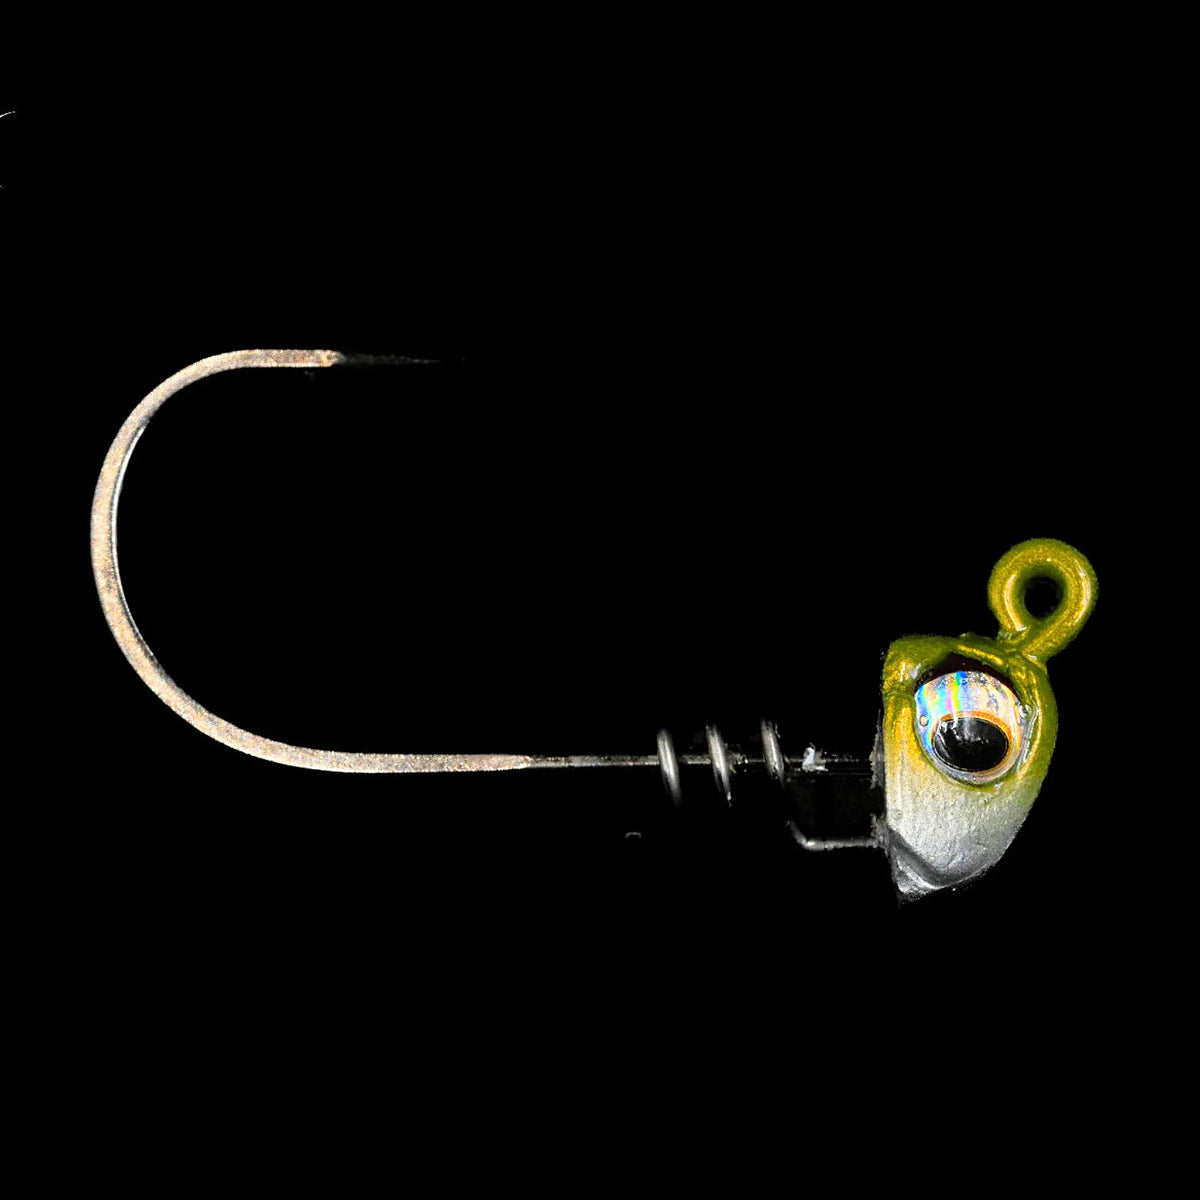 No Live Bait Needed NLBN Jig Heads are in stock. What are you are